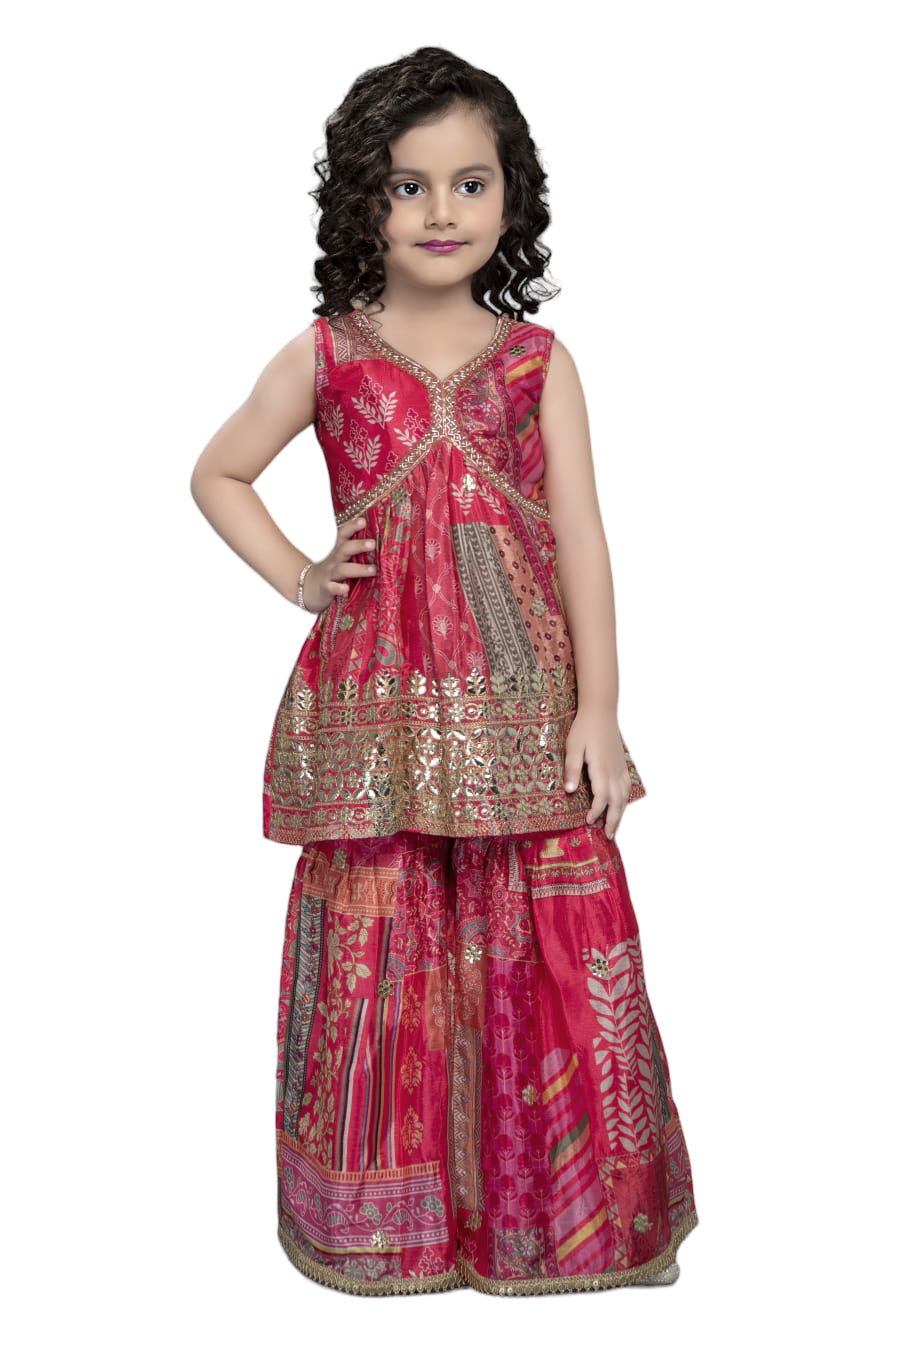 PINK COLORED PRINTED ANARKALI SET WITH ALIA CUT STYLE TOP AND PALAZZO PANTS